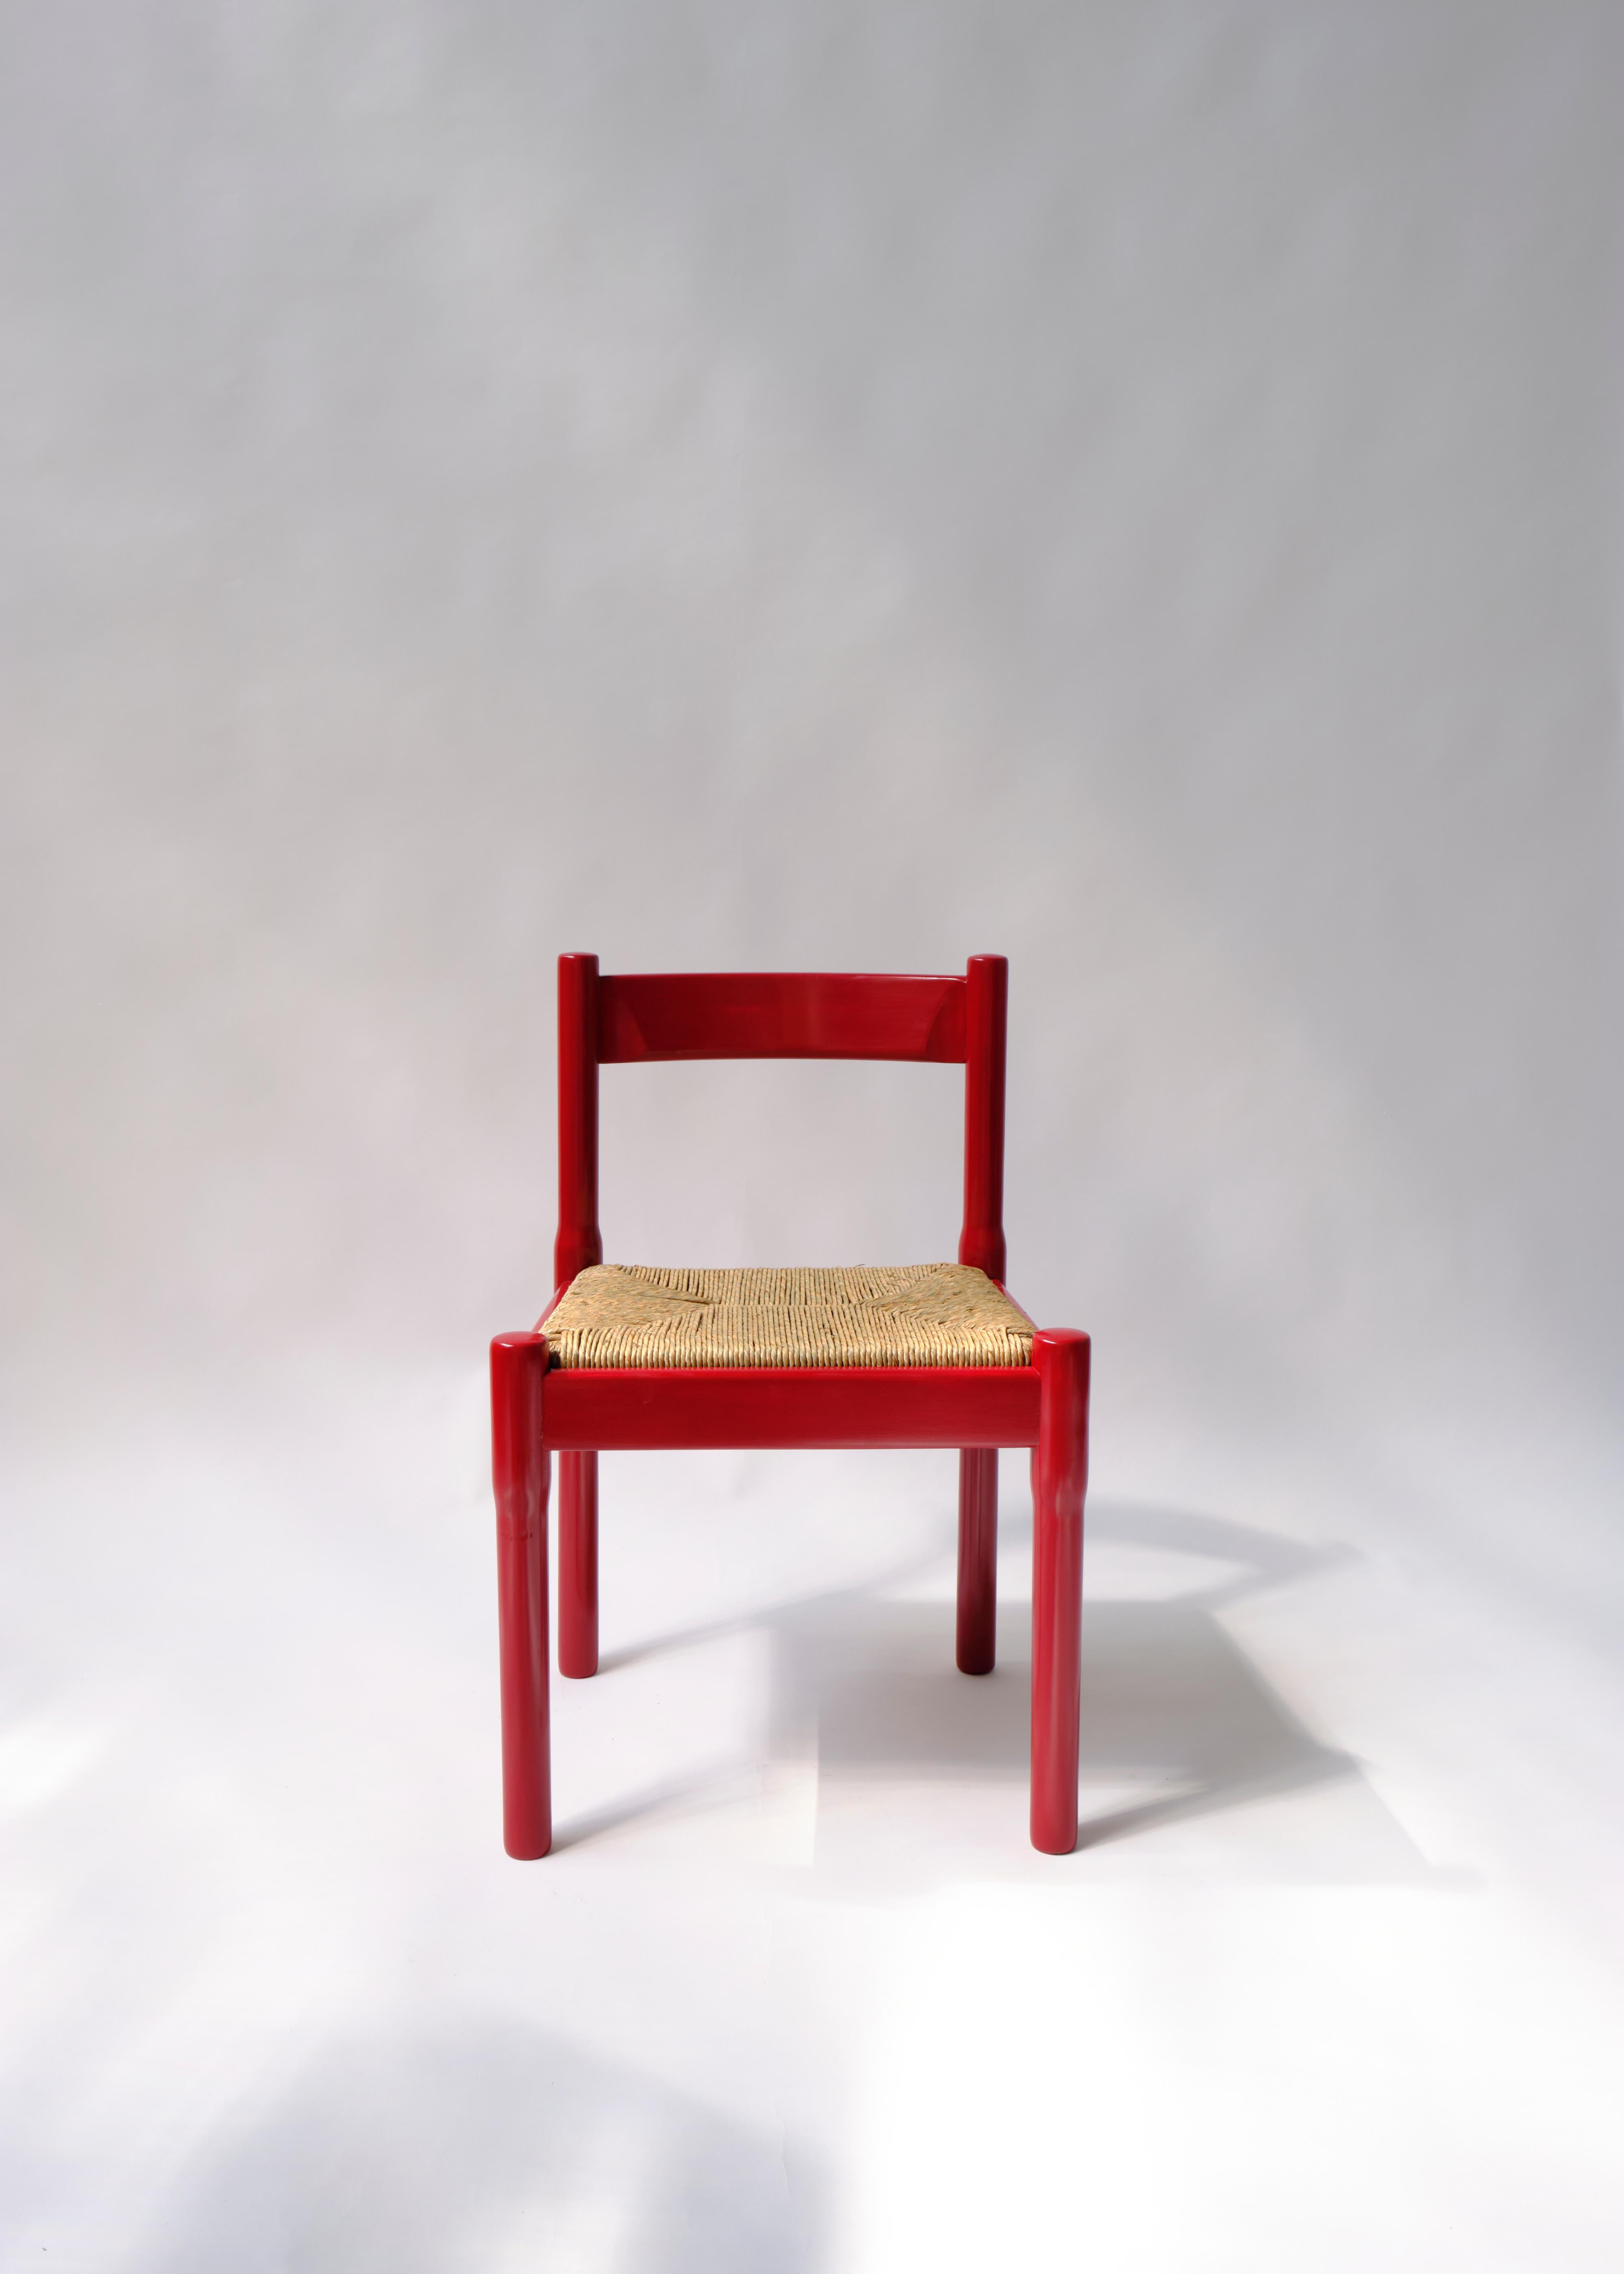 Carimate 115 chair (single)

The Carimate or “Red Chair” is one of the most iconic of Magistretti’s designs if not the most popular here in Britain. Designed in 1959 and first manufactured by Frattelli in 1960 for the club house of the Carimate